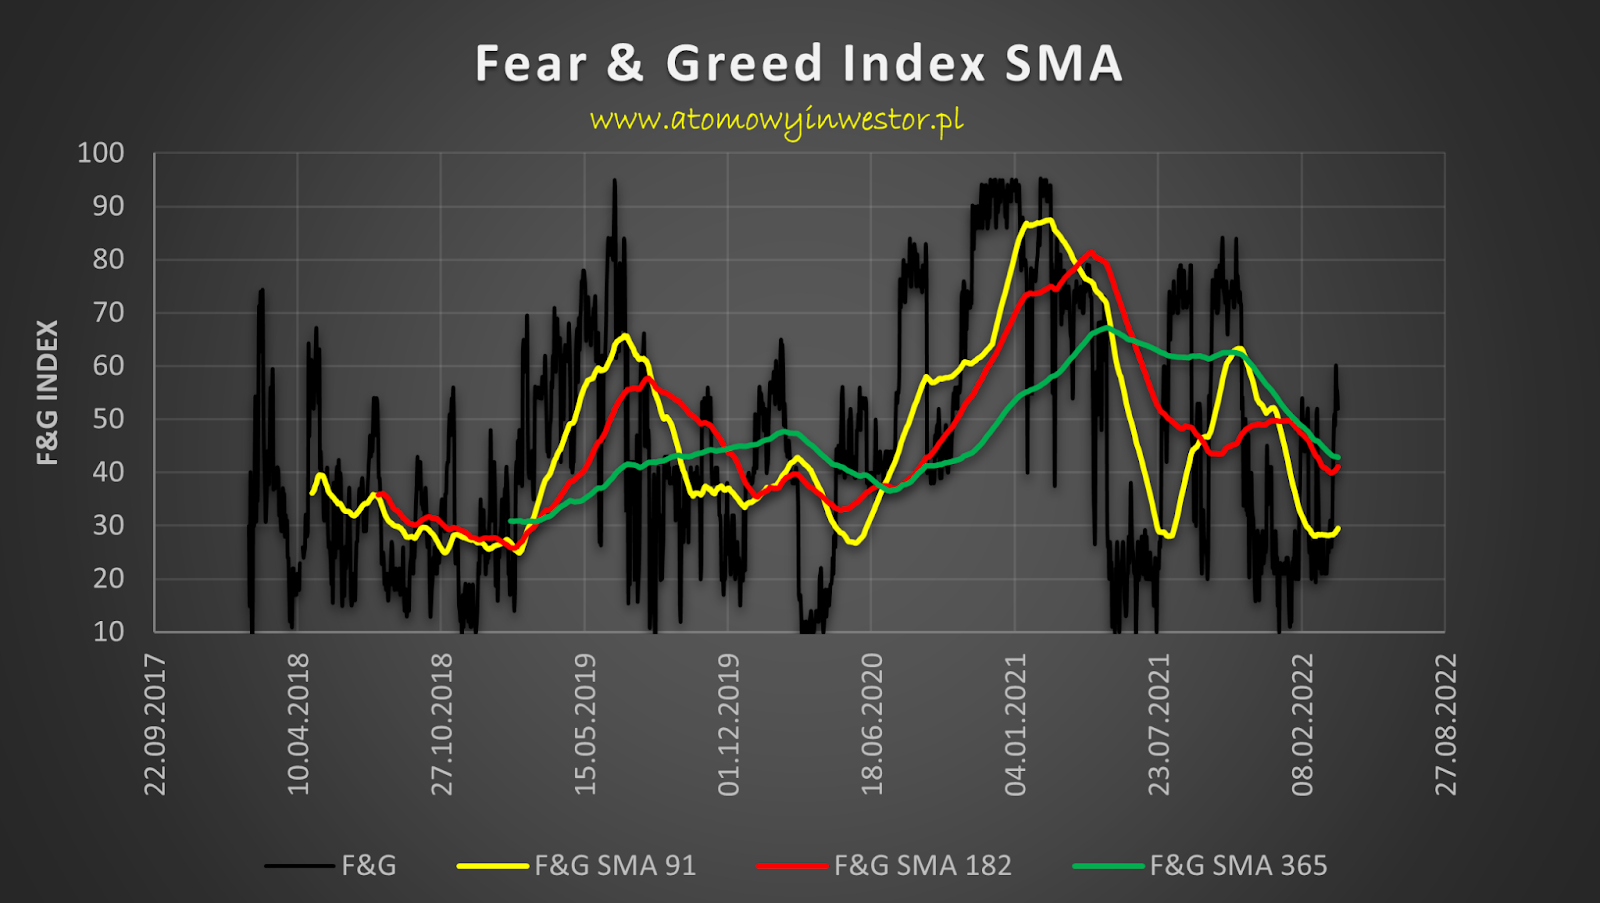 Fear And Greed Index - CoinDesk